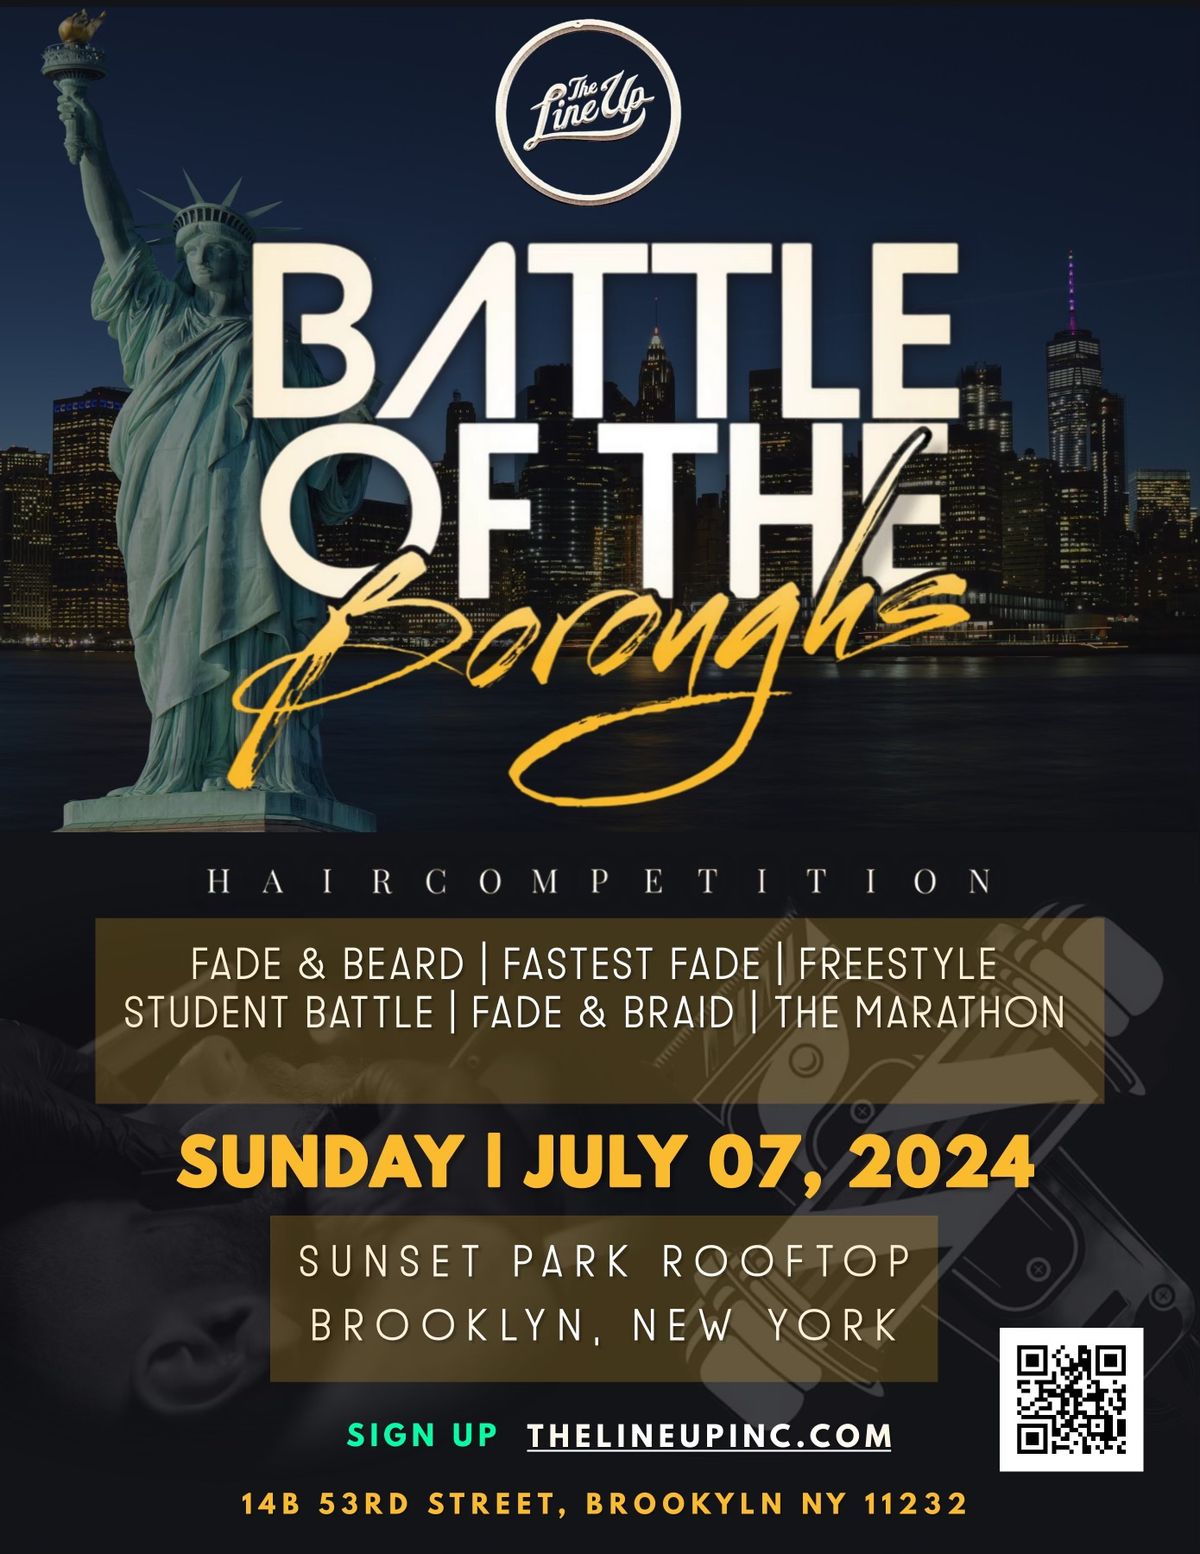 The Battle Of The Boroughs